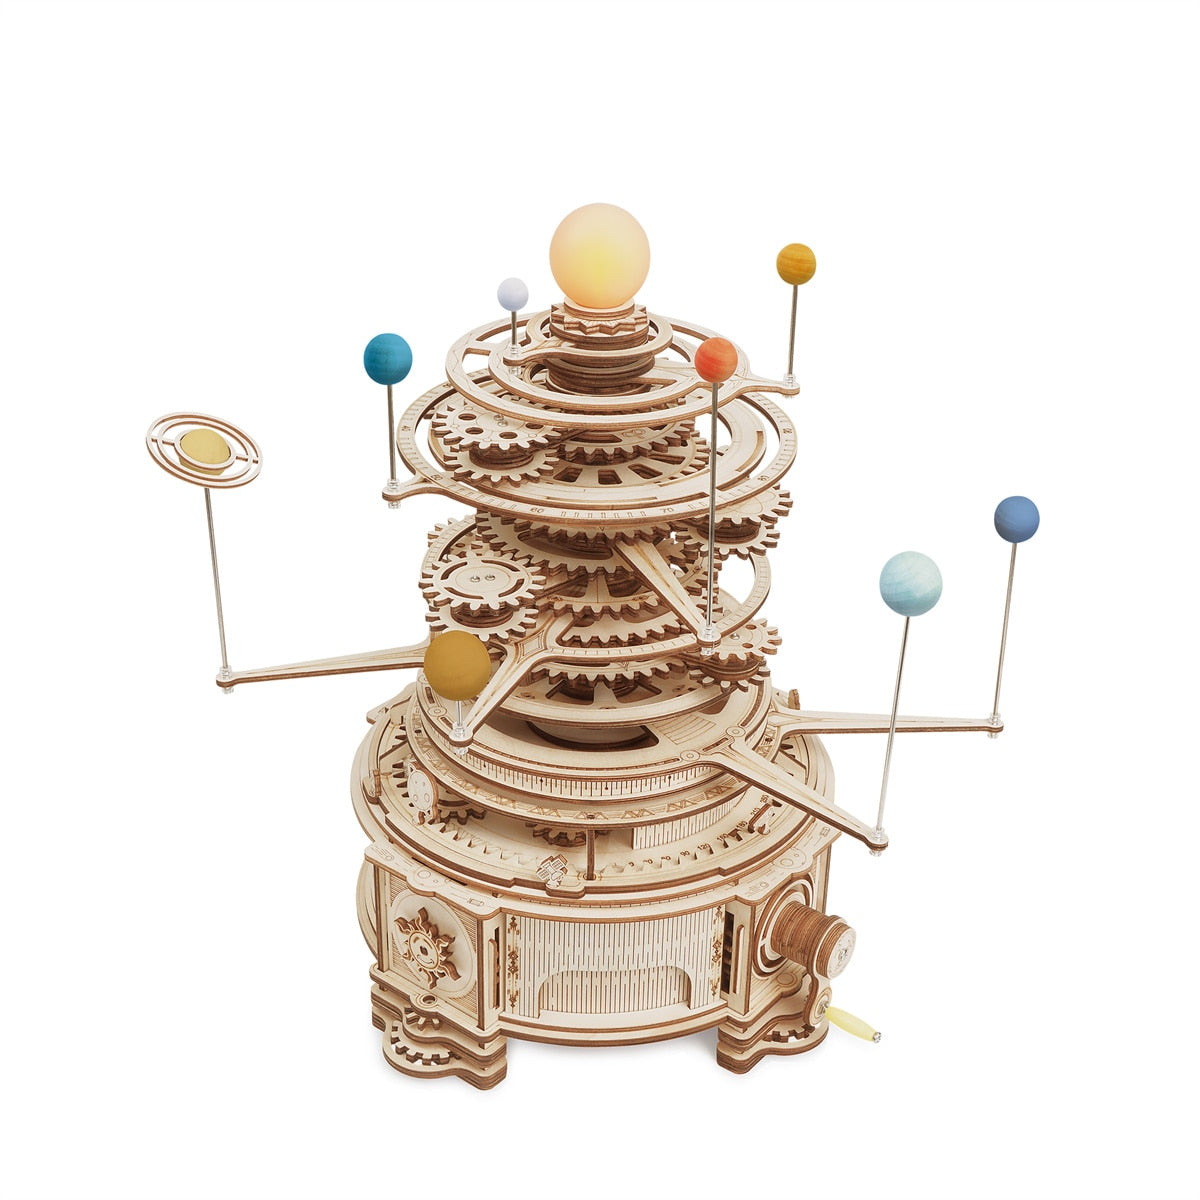 316PCS Rotatable Mechanical Orrery DIY Wooden Model Building Block Kits Assembly Toy